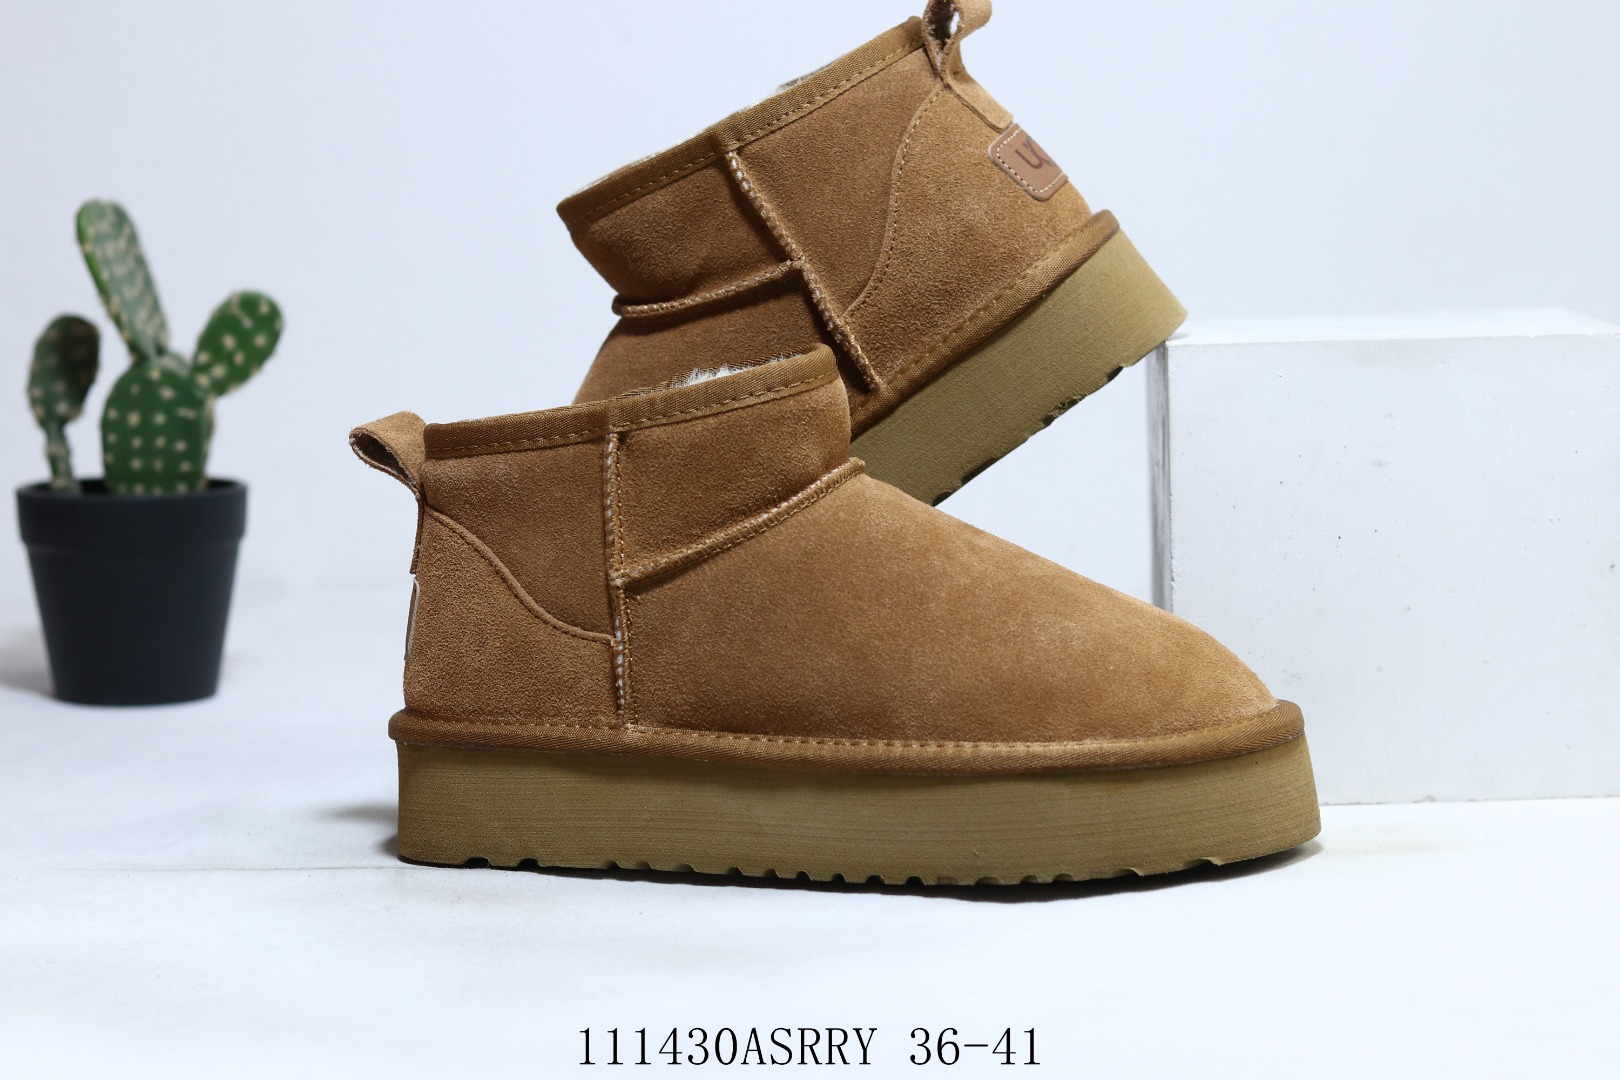 What brand of shoes is UGG? How to maintain UGG boots?